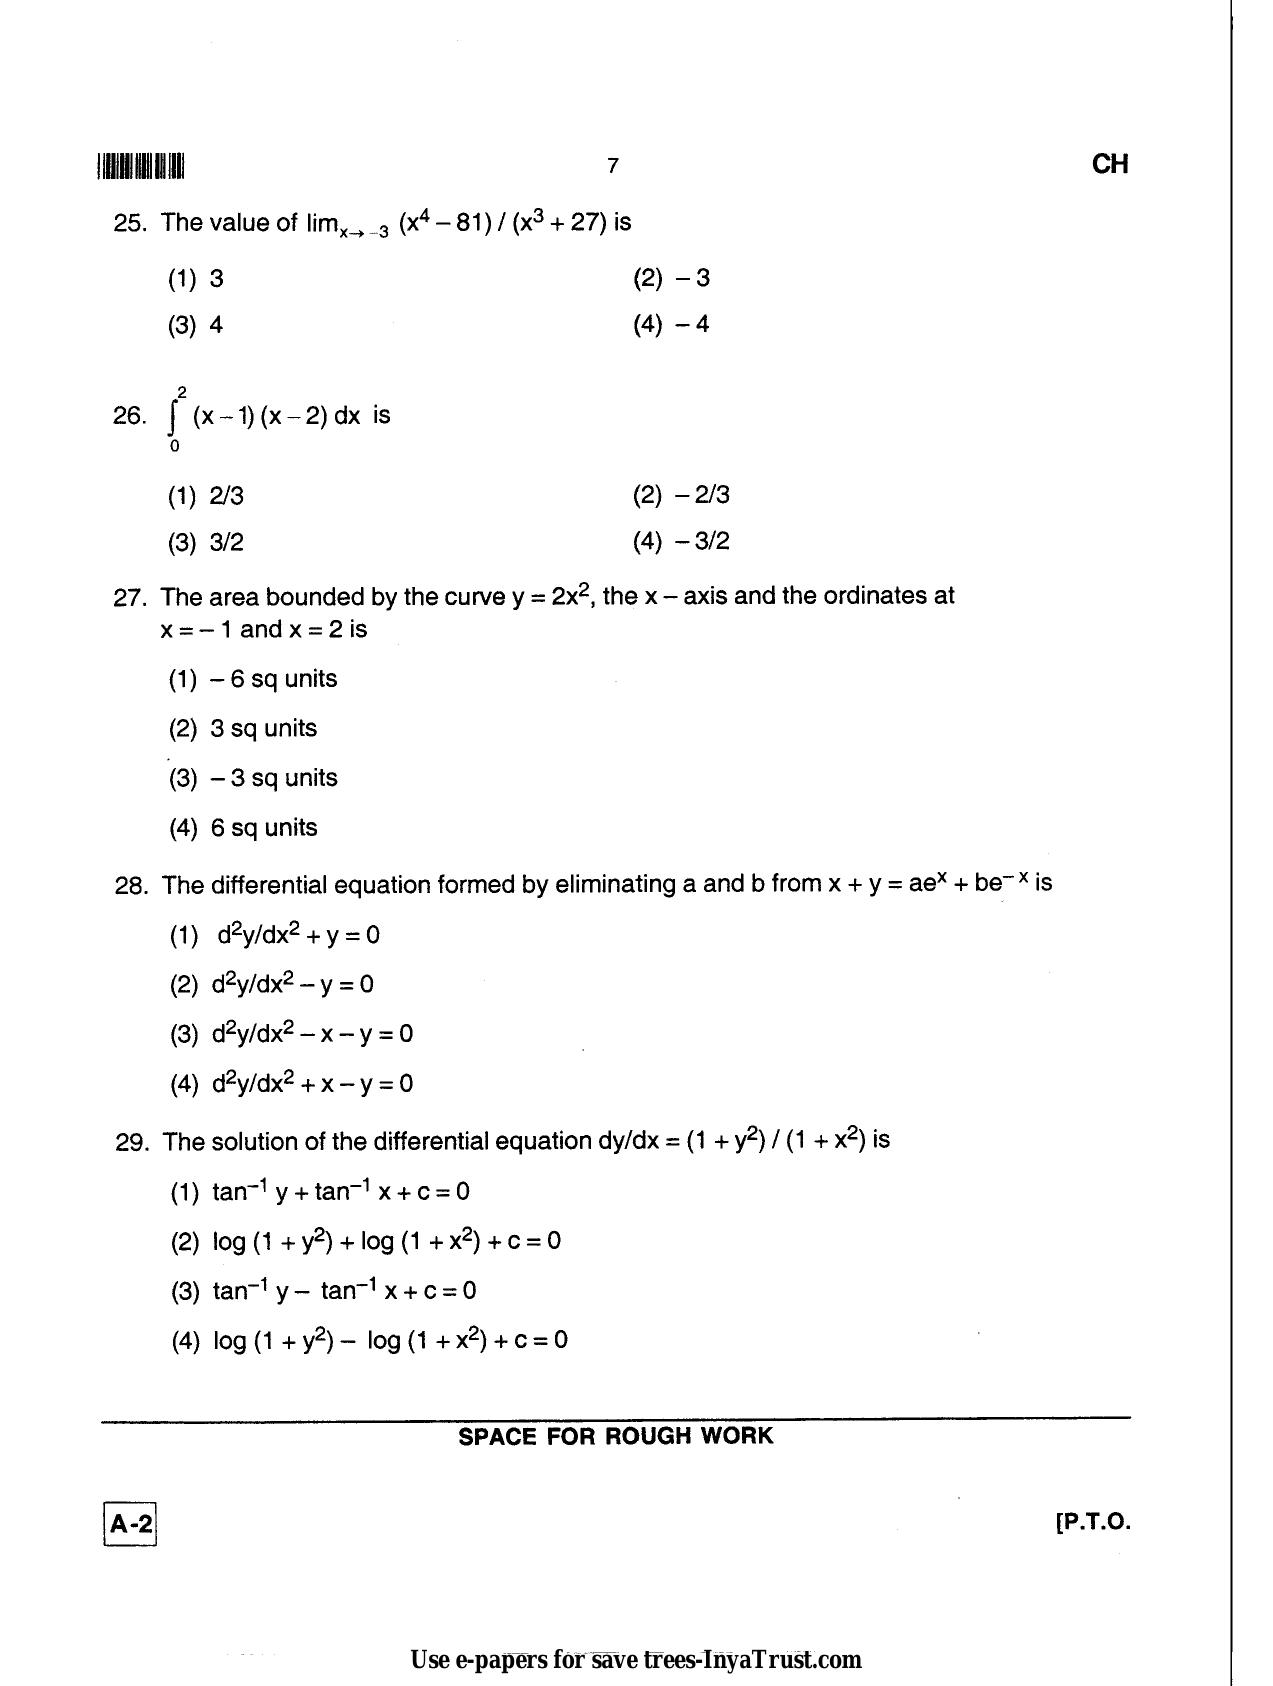 Karnataka Diploma CET- 2013 Chemical Engineering / Polymer Technology Question Paper - Page 7